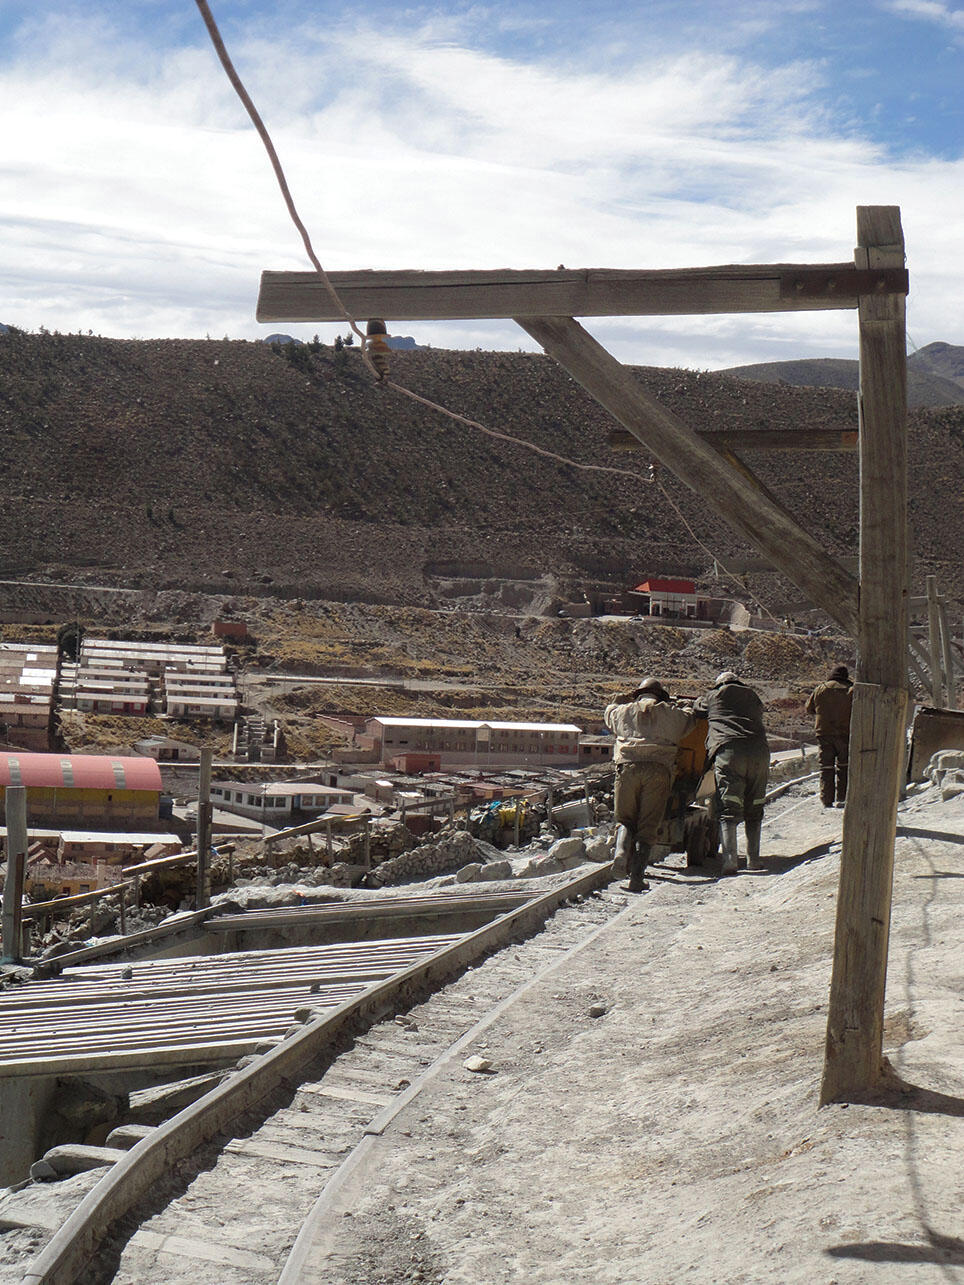 Two miners push a handcart full of minerals along the tracks in Potosí. (Photo by Andrea Marston.)